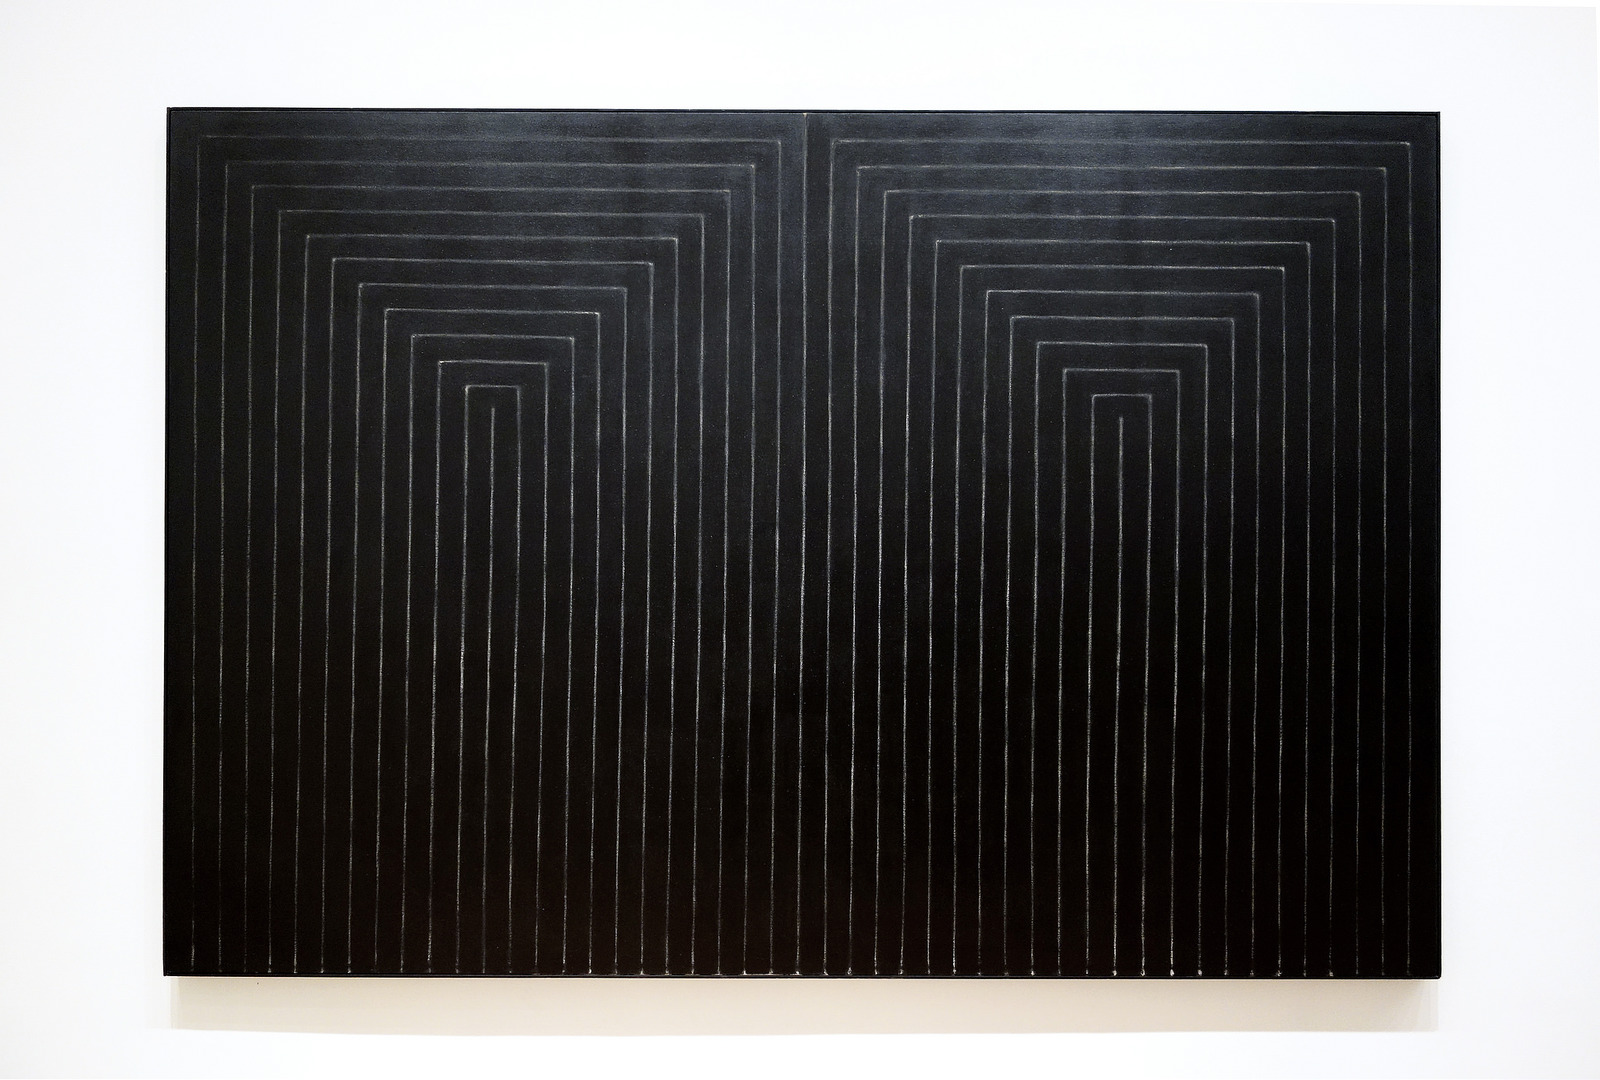 Frank Stella, The Marriage of Reason and Squalor, II, 1959, enamel on canvas, 230.5 x 337.2 cm (The Museum of Modern Art)